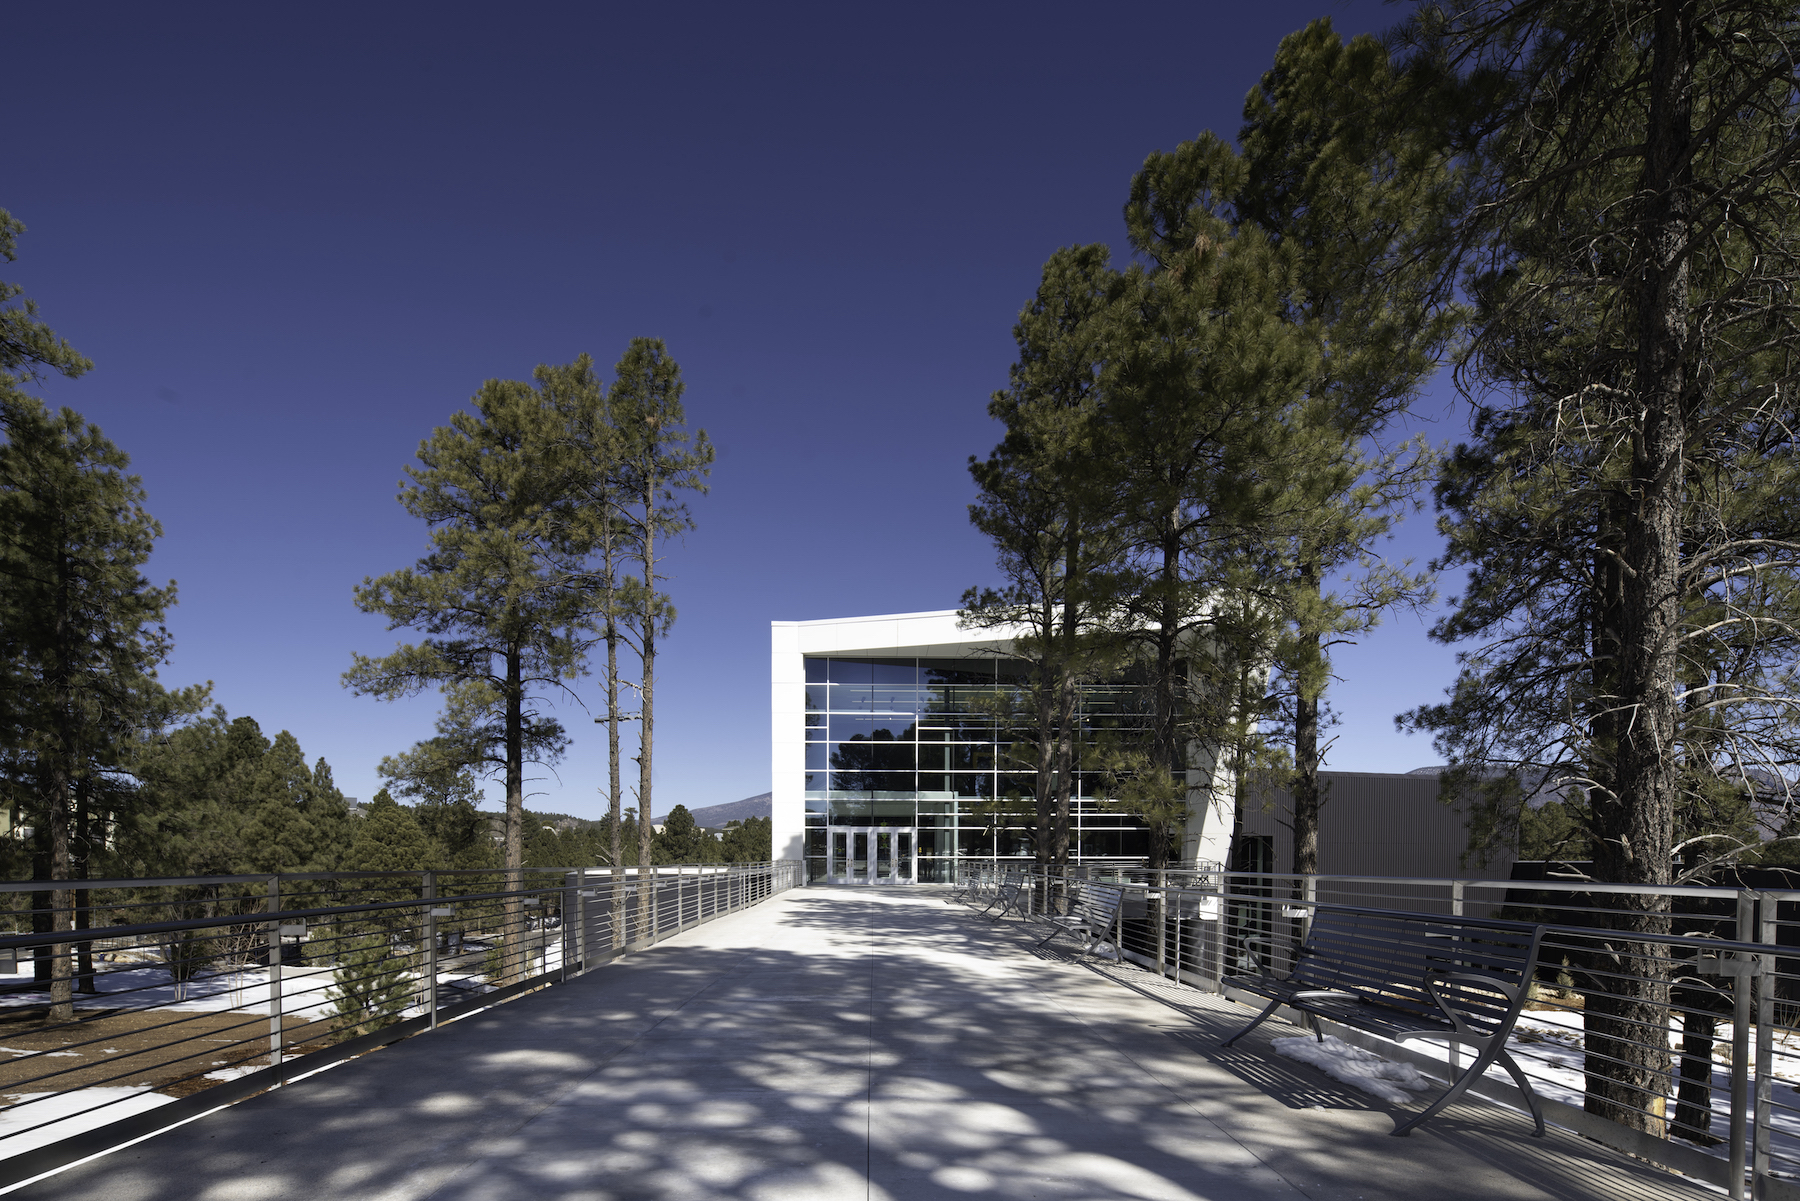 Northern Arizona University opens a new training center for its student  athletes